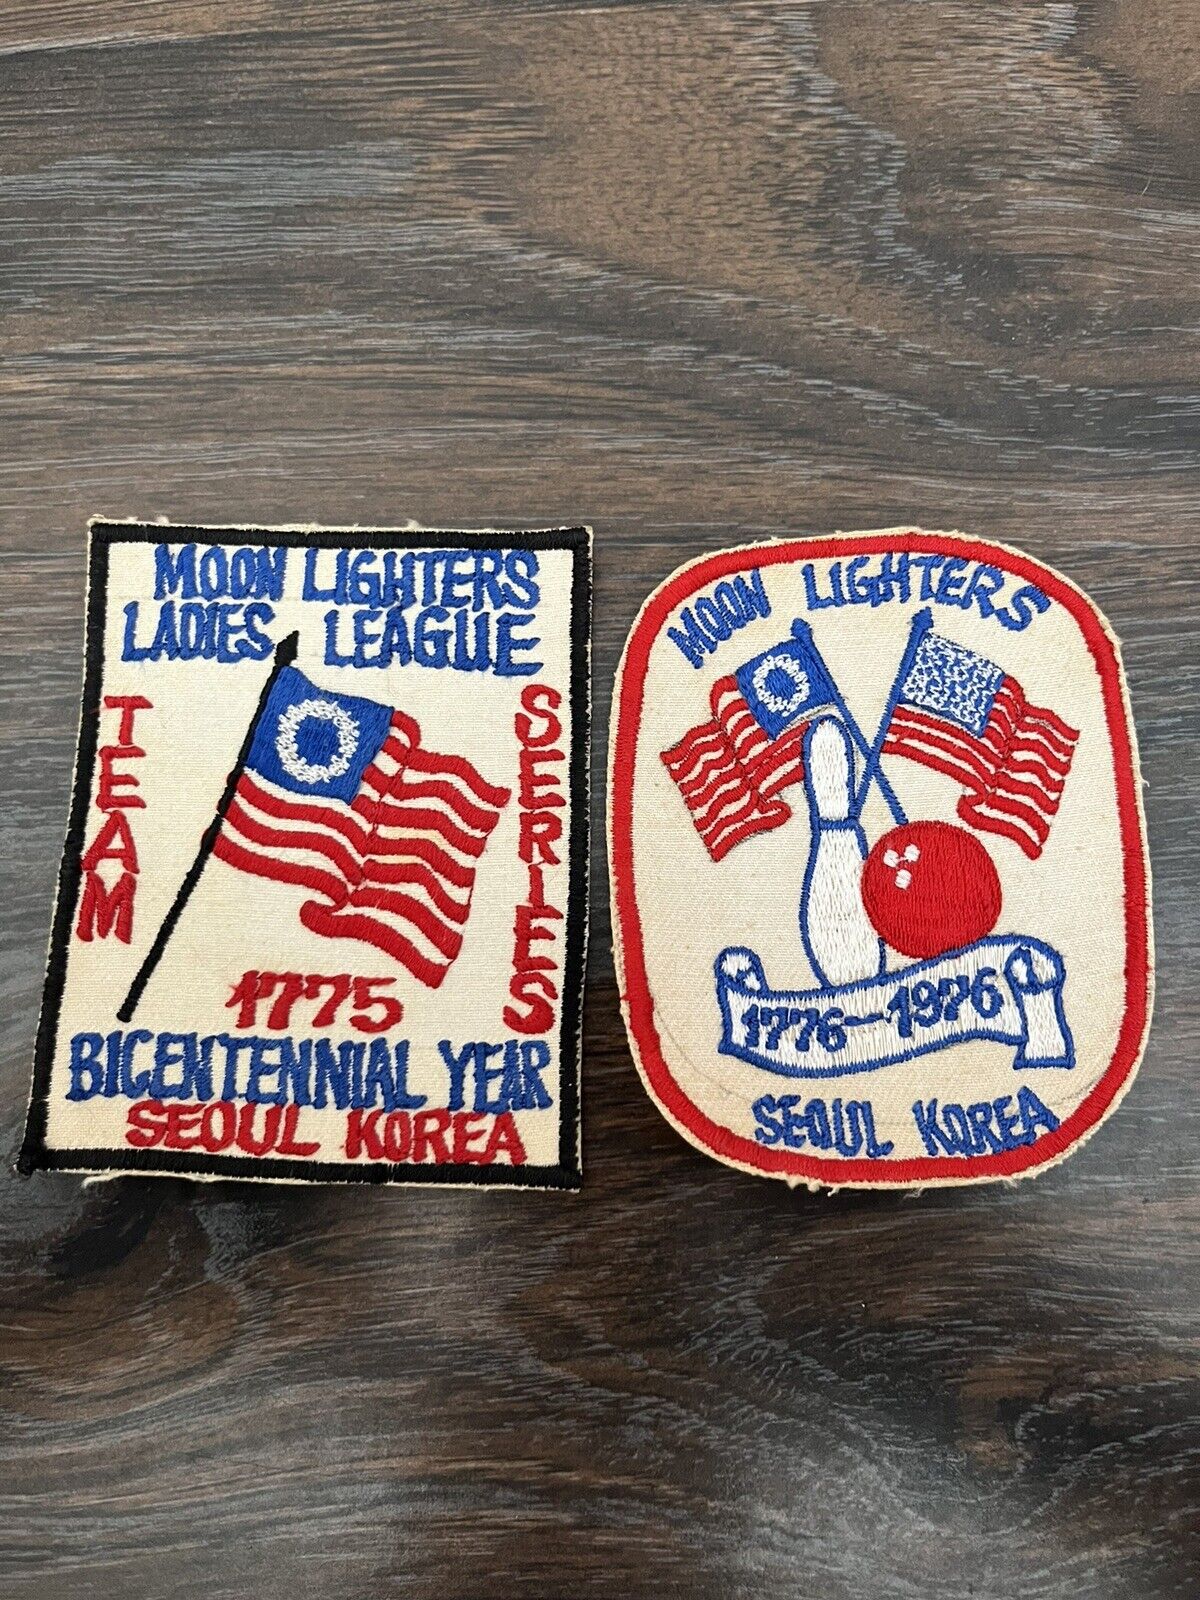 Vintage Moonlighters Patches Korea 1976, Bowling, Seoul